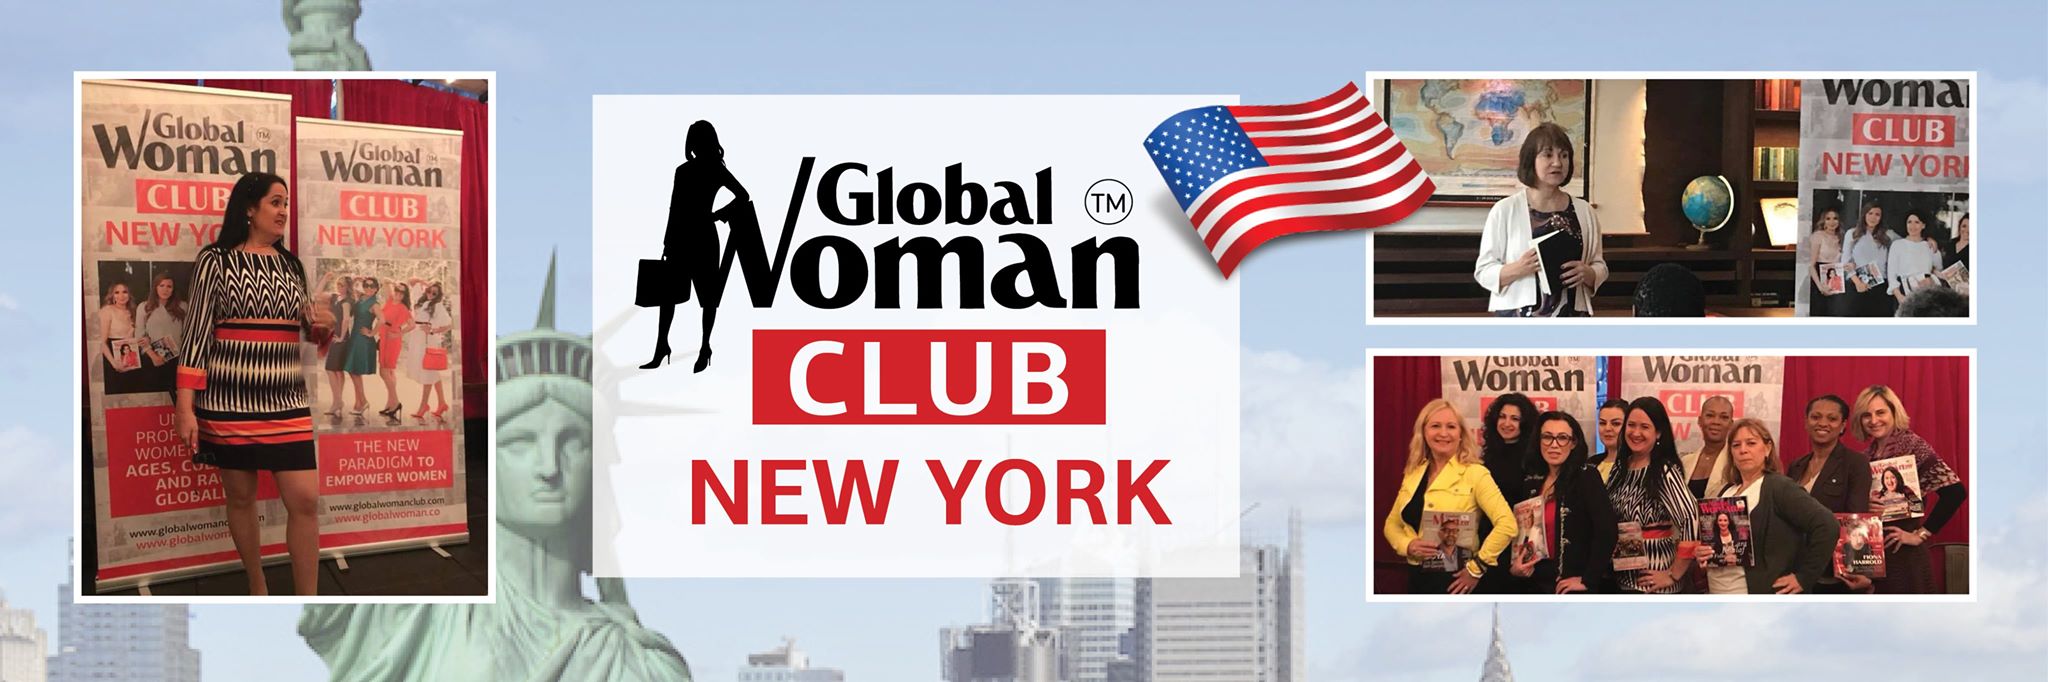 GLOBAL WOMAN CLUB NEW YORK - BUSINESS NETWORKING EVENT